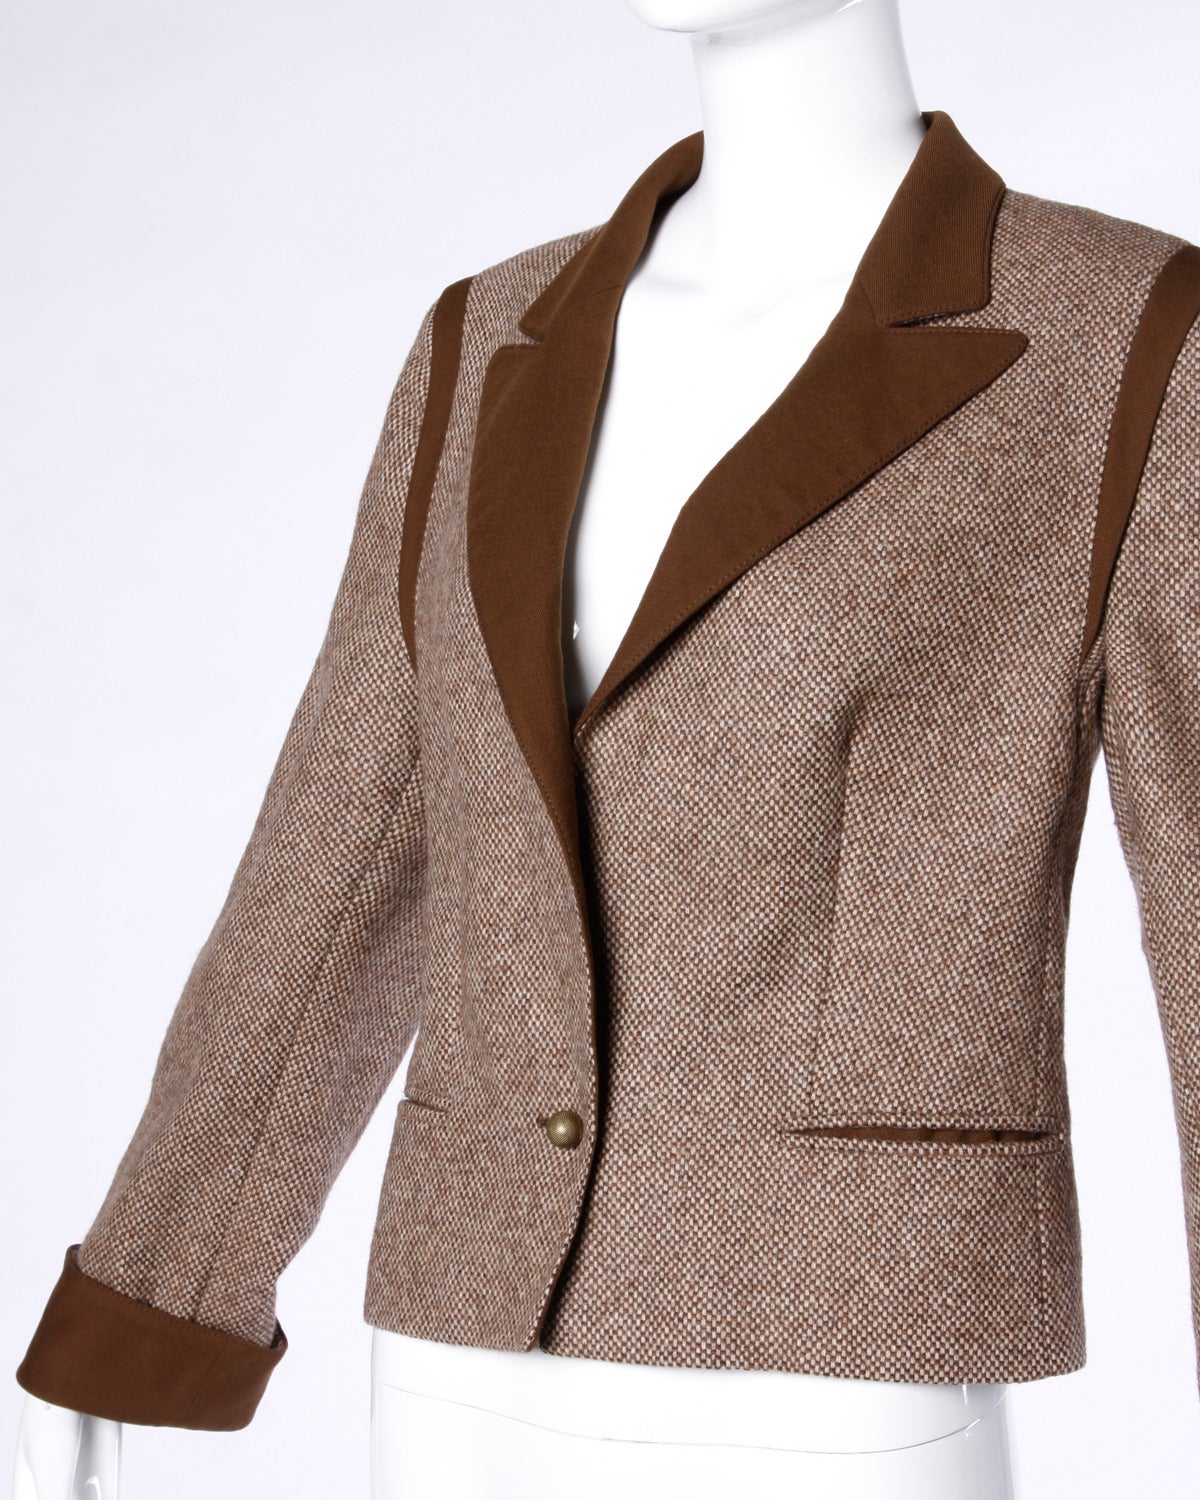 Brown tweed wool vintage blazer jacket by Louis Feraud. 

Details:

Fully Lined
Front Button Closure
Marked Size: 42
Color: Brown
Fabric: Not Marked
Label: Louis Feraud PARIS

Measurements:

Bust: Up To 34"
Waist: Up To